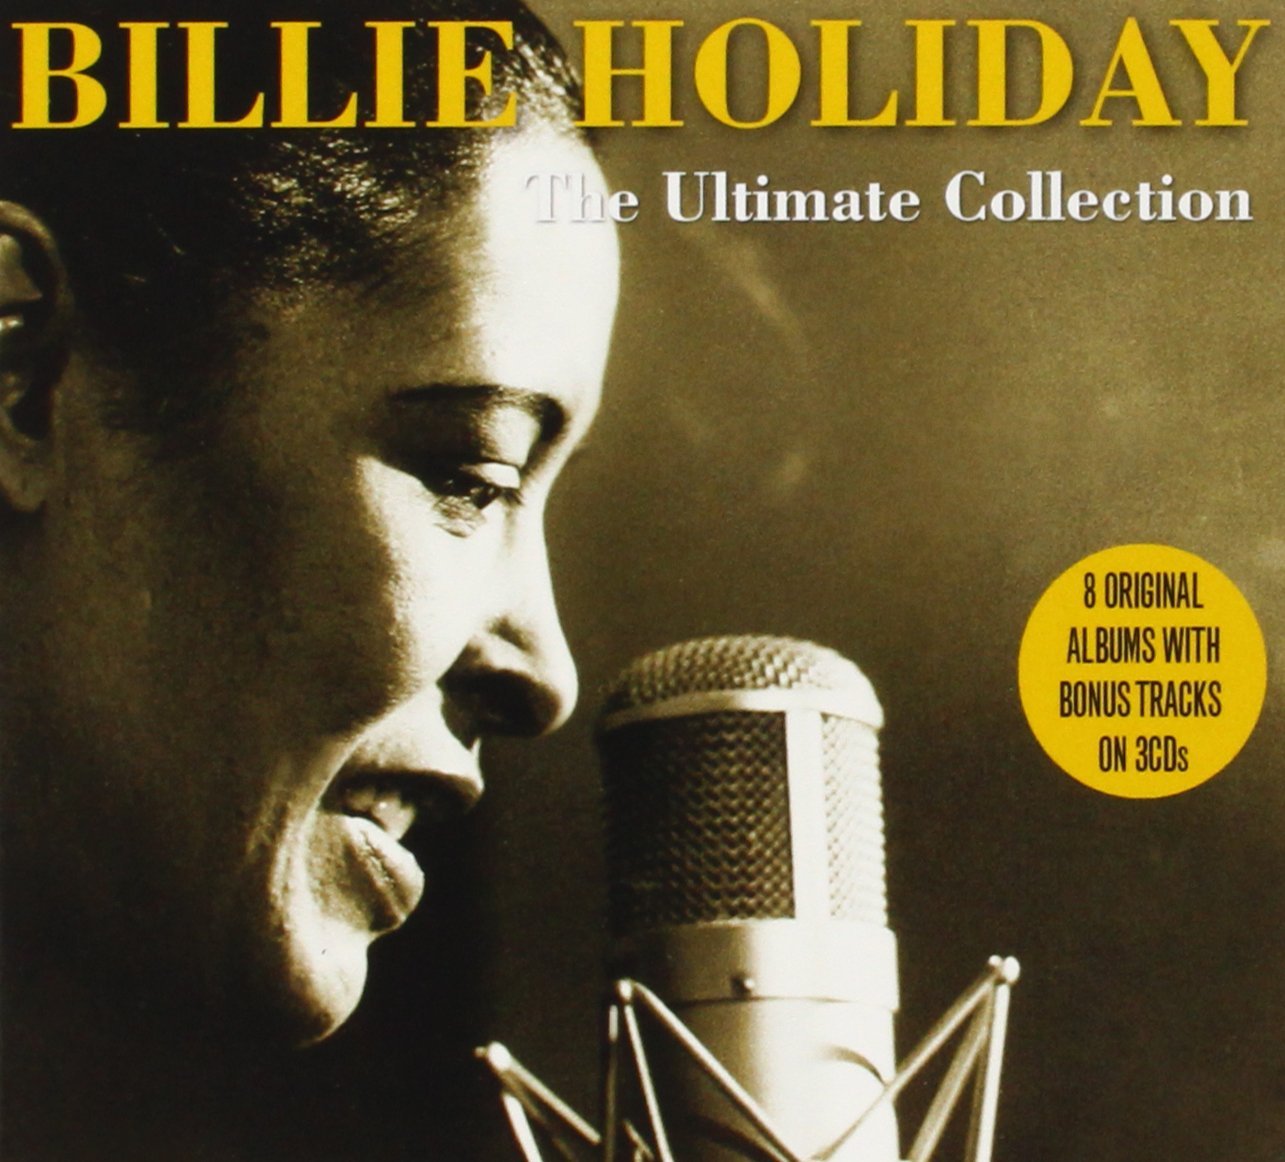 Billie Holiday - The Ultimate Collection: 8 Original Albums (Music CD)